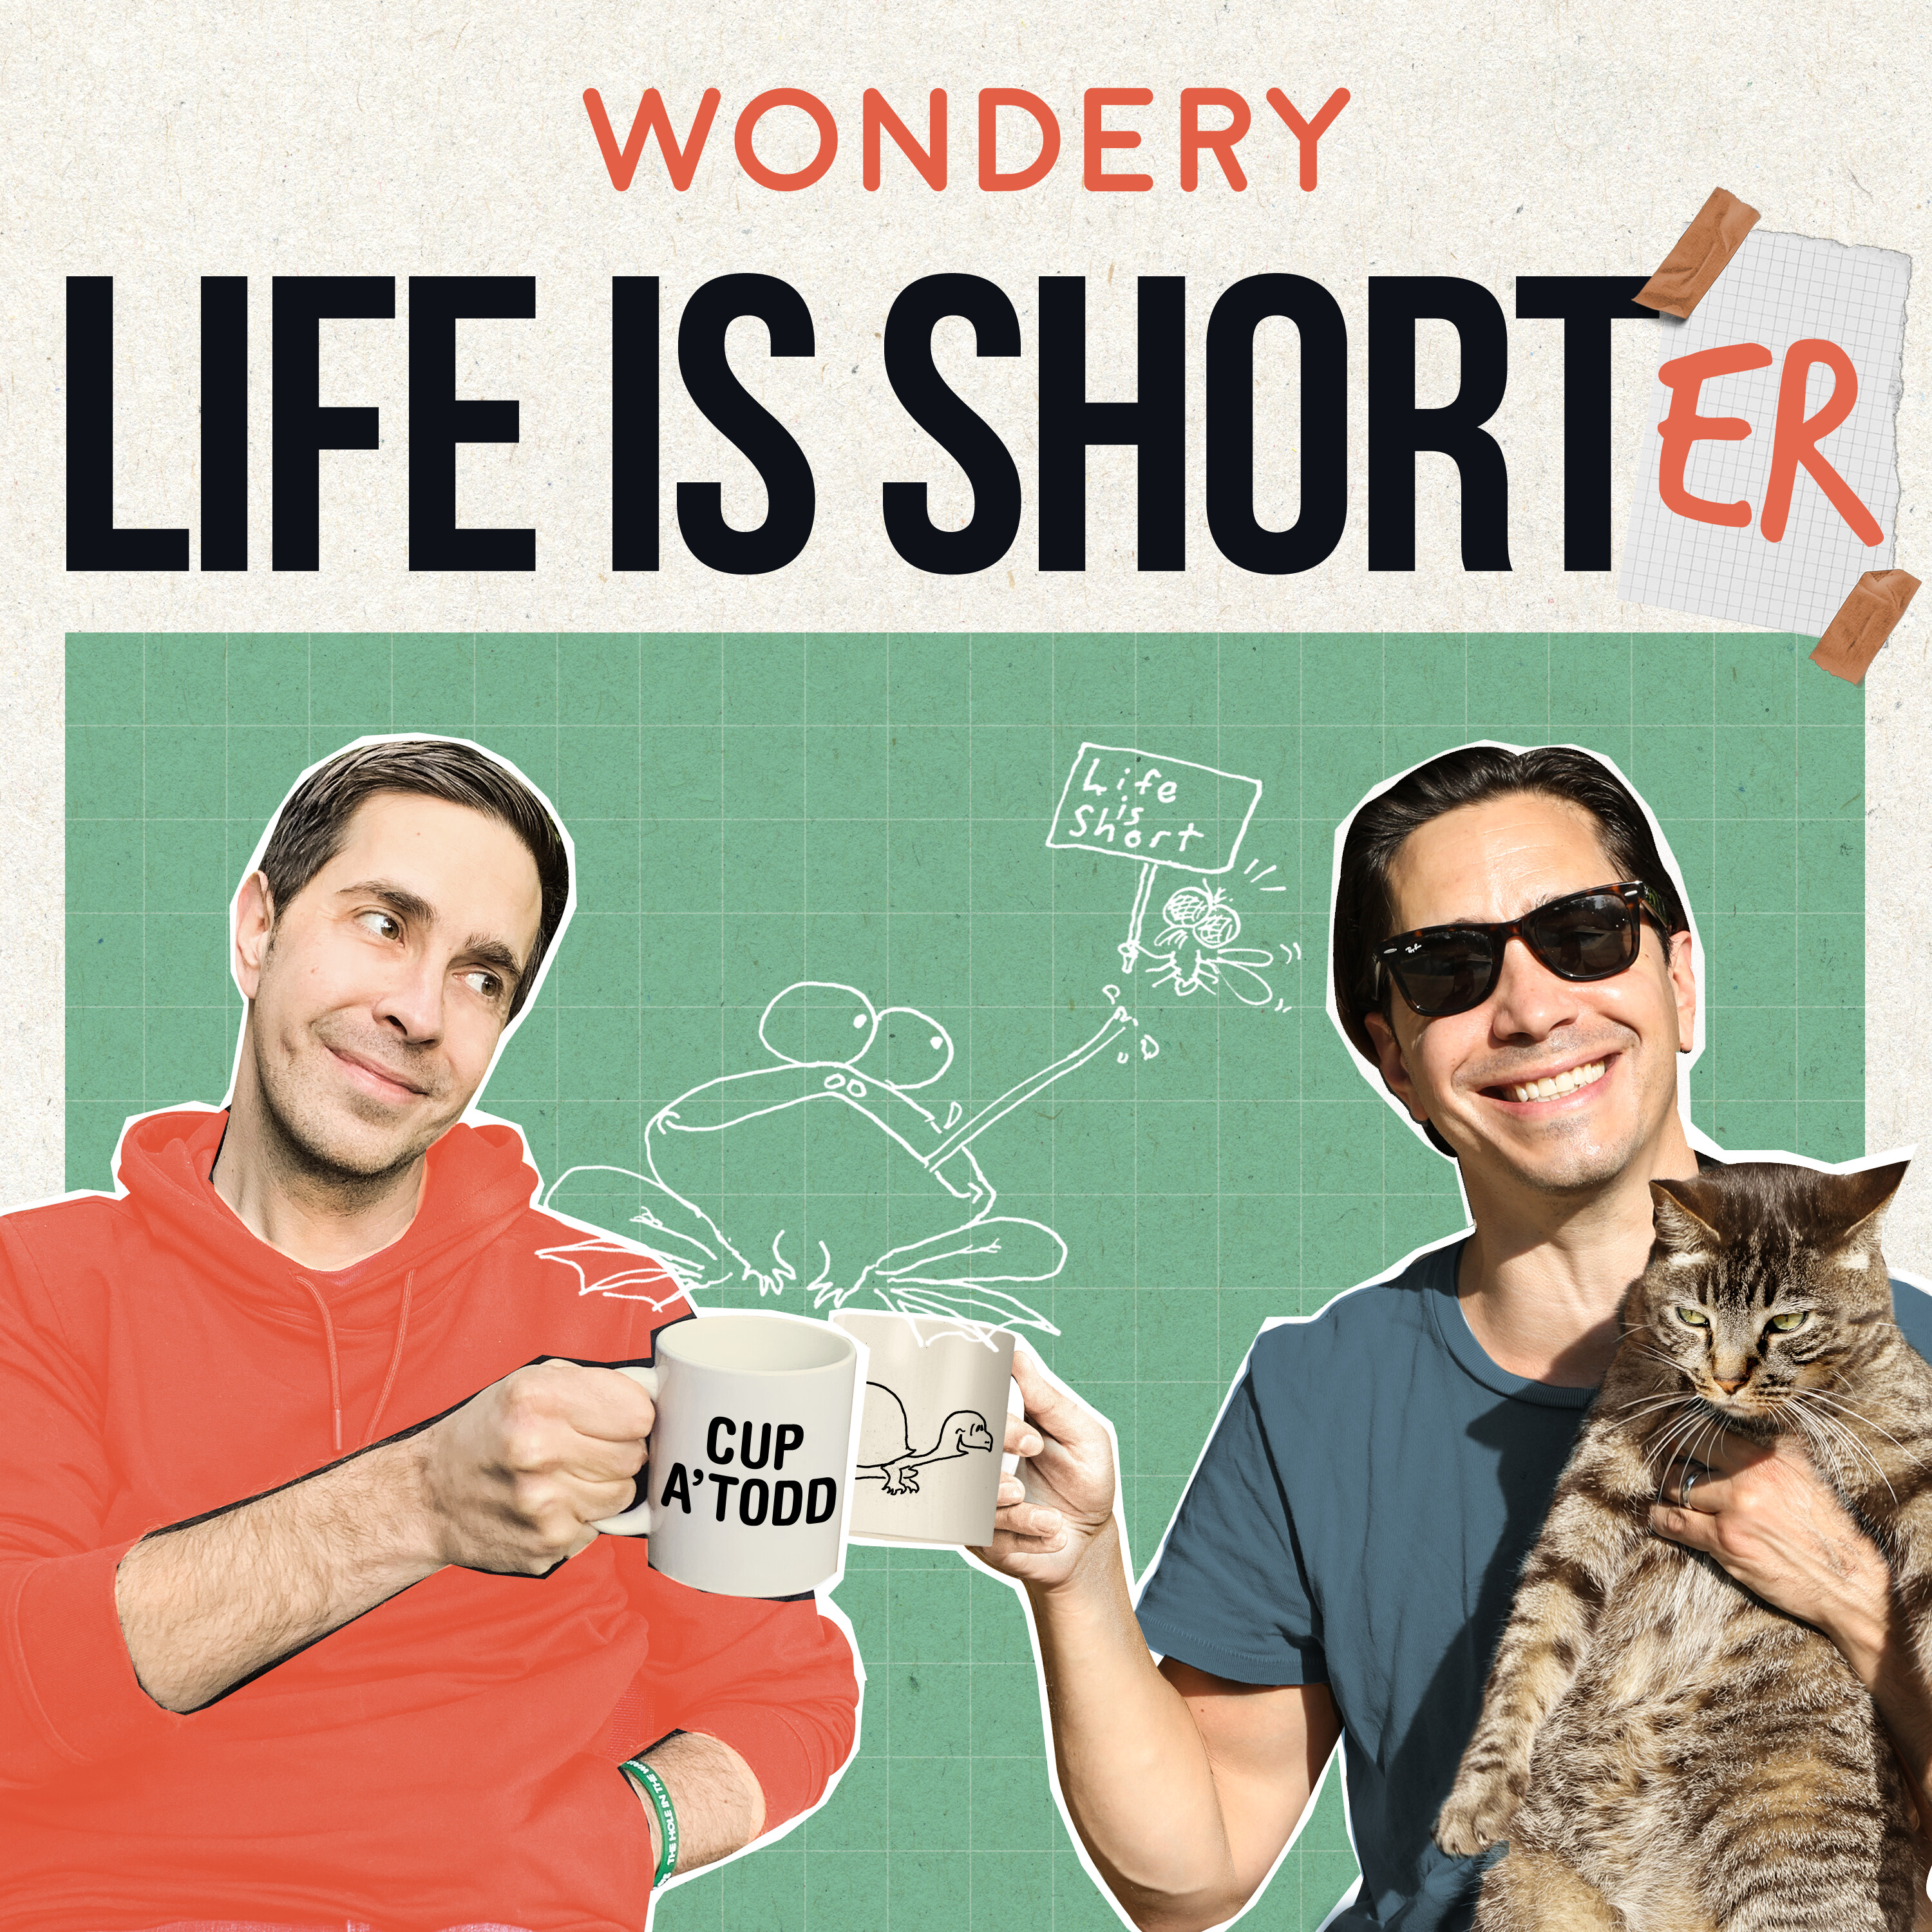 Life Is Short(er): Aaron Rodgers, Sports Memories, and Helping Hawaii 🌺 by Wondery